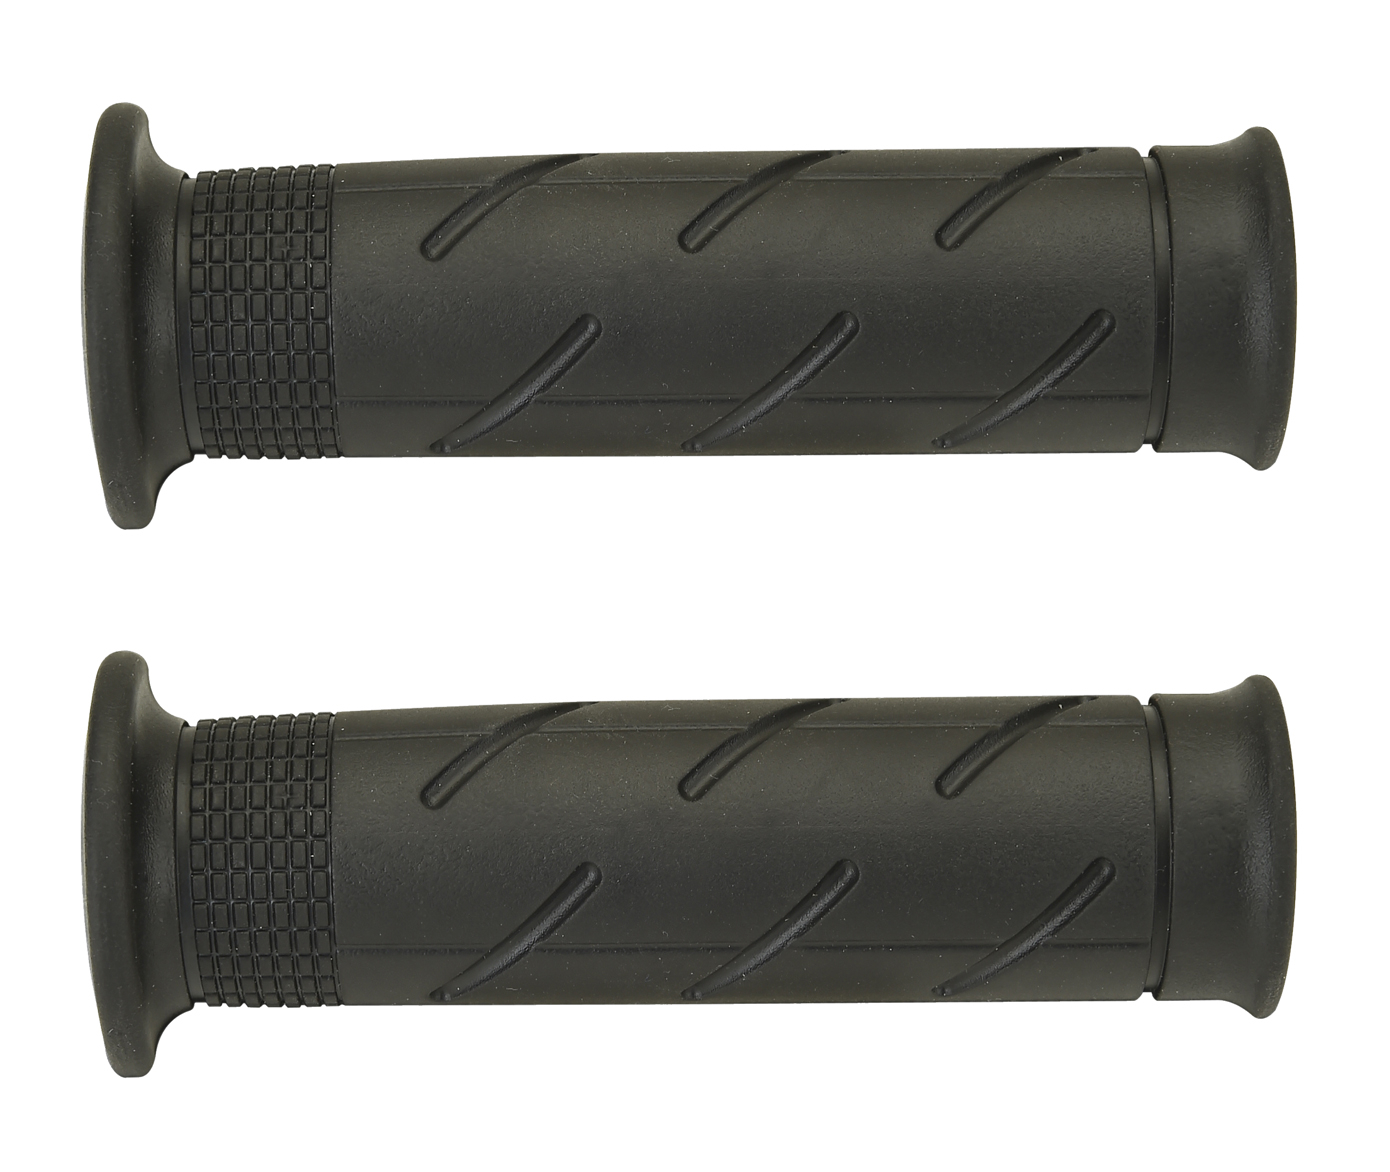 Domino Basic Trials Off-Road Grips